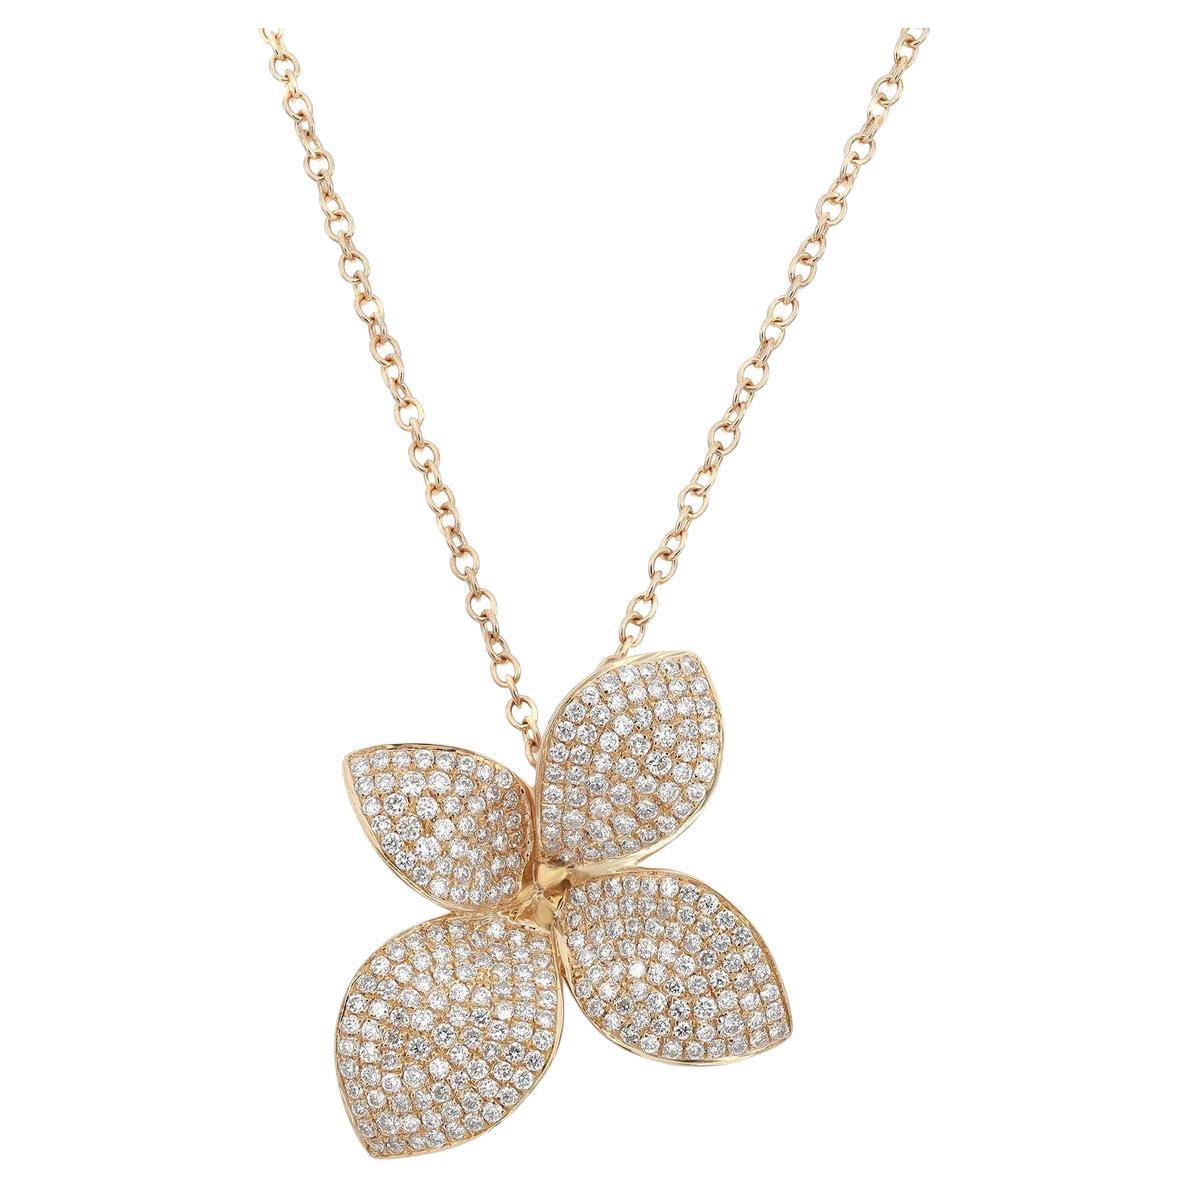 1.07 Carat Diamond Flower Necklace 18K Yellow Gold For Sale